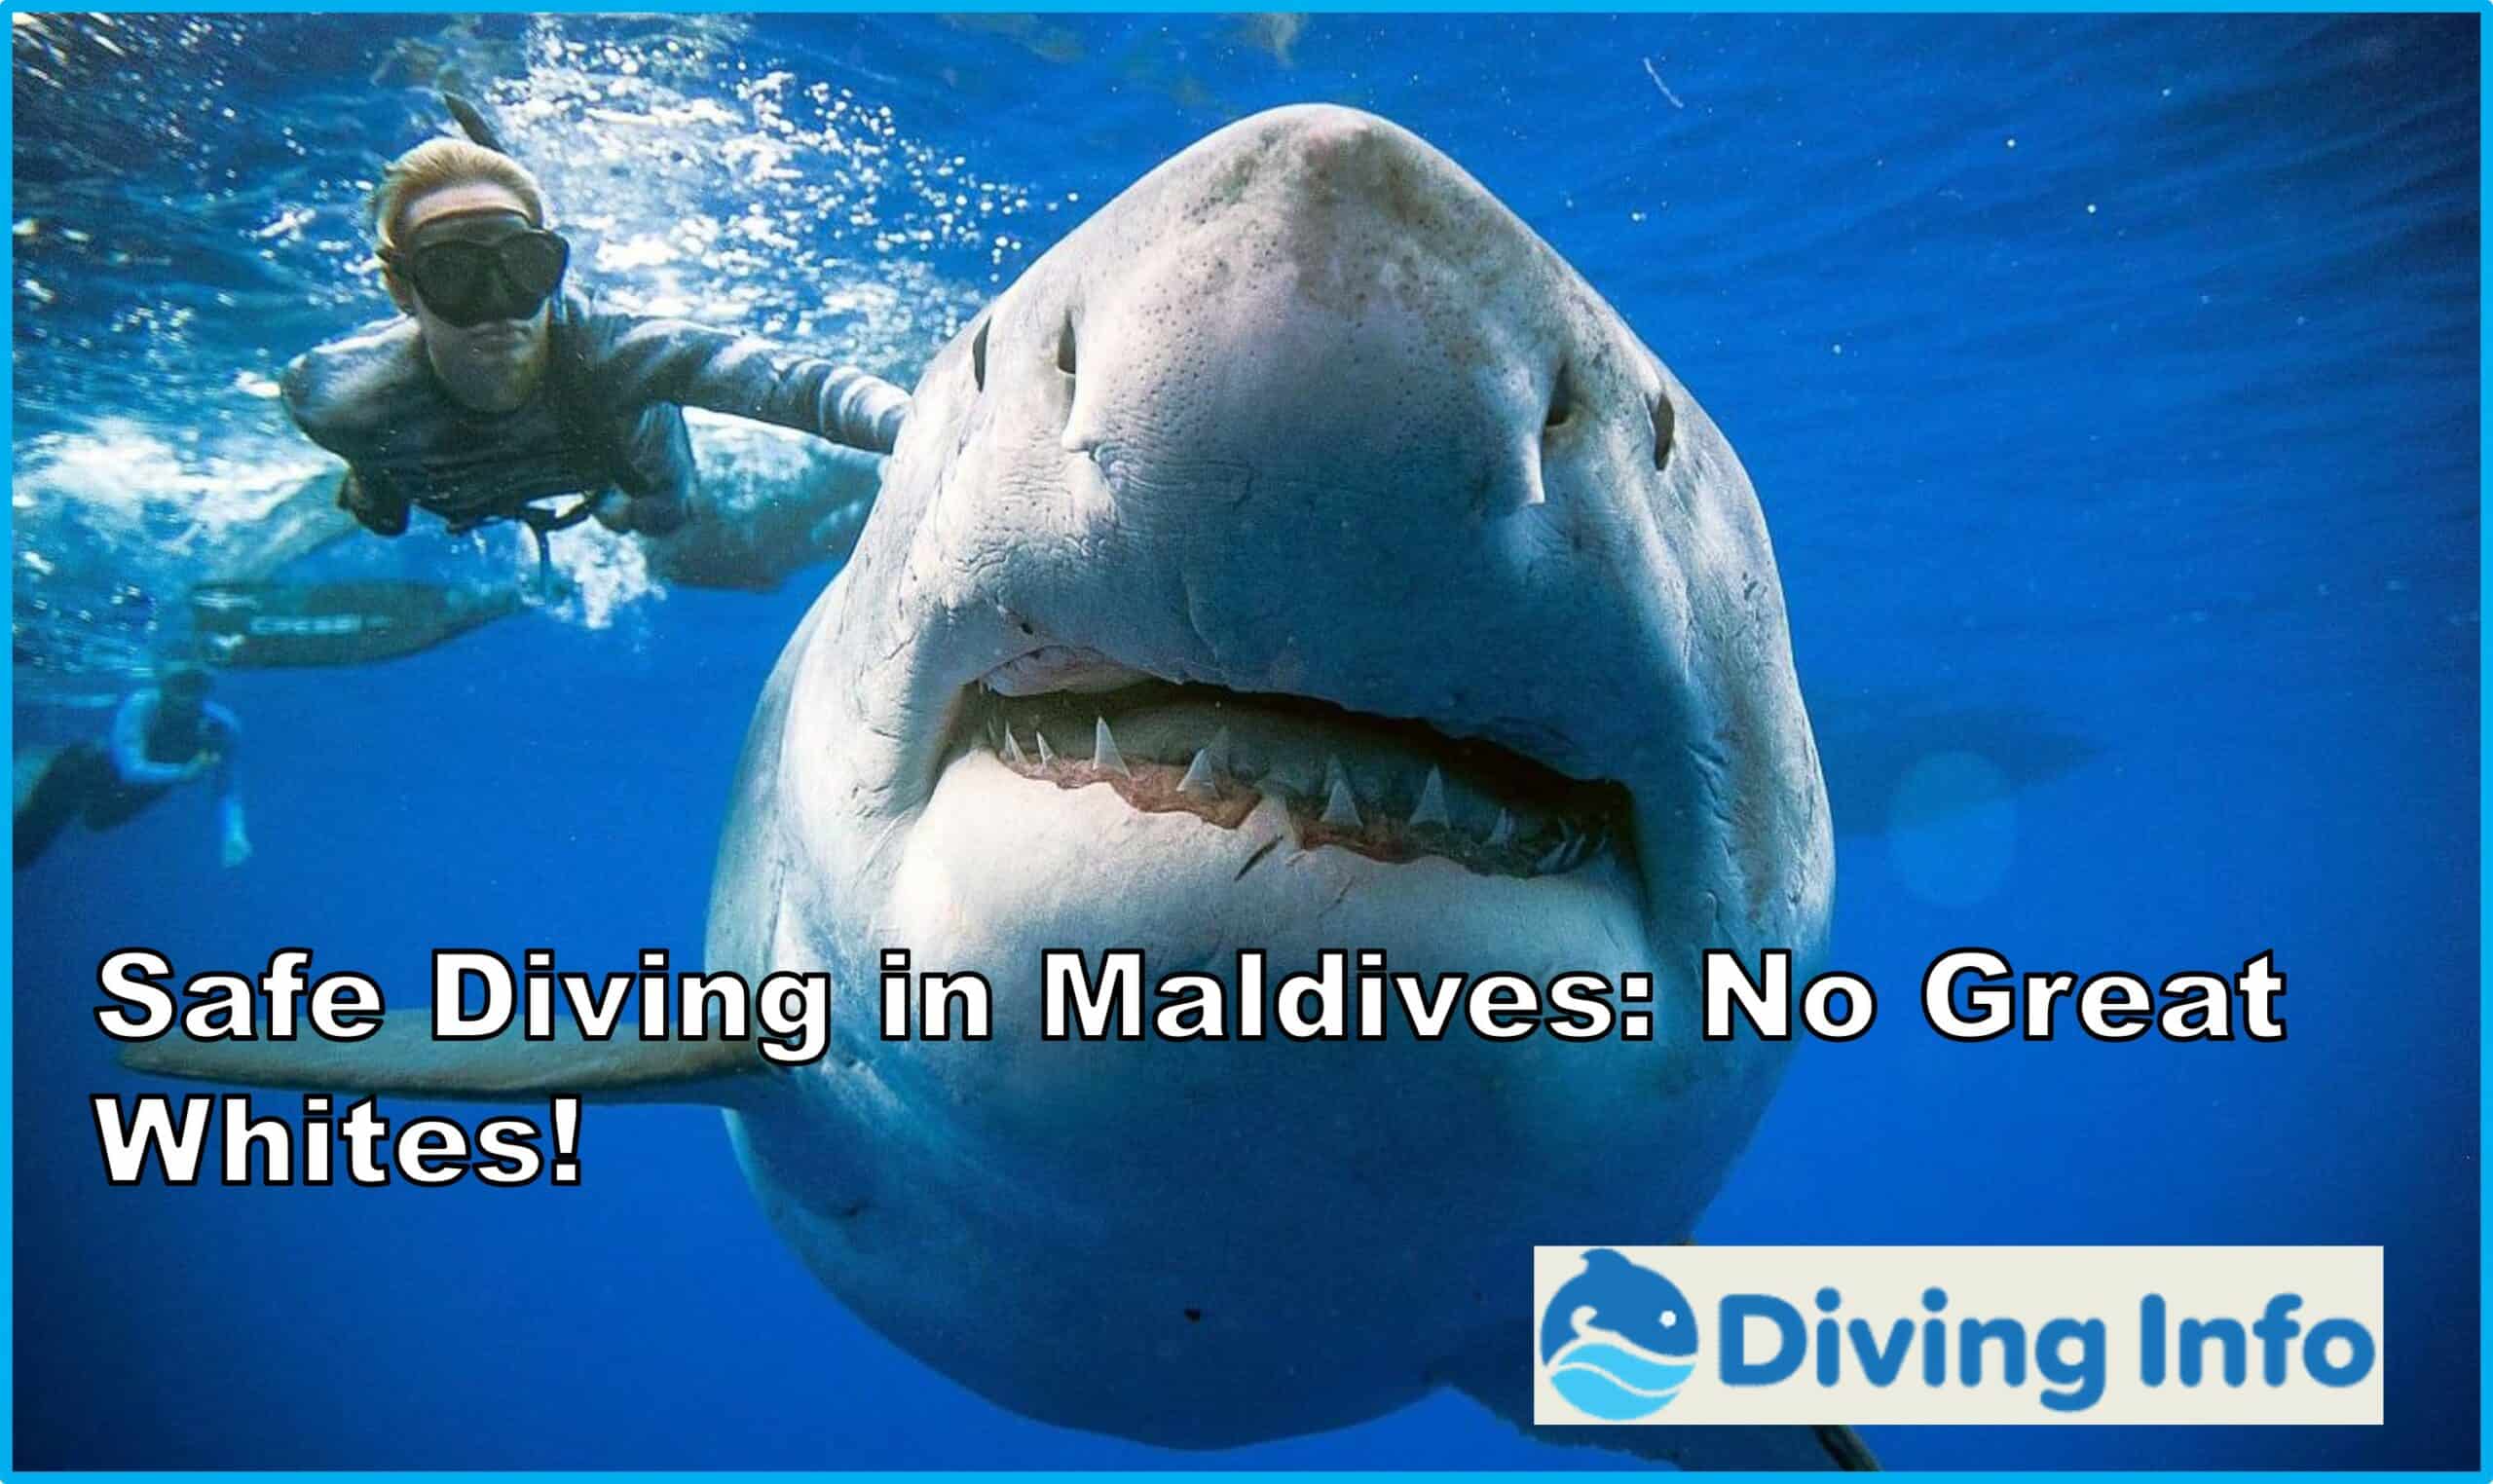 Safe Diving in Maldives No Great Whites